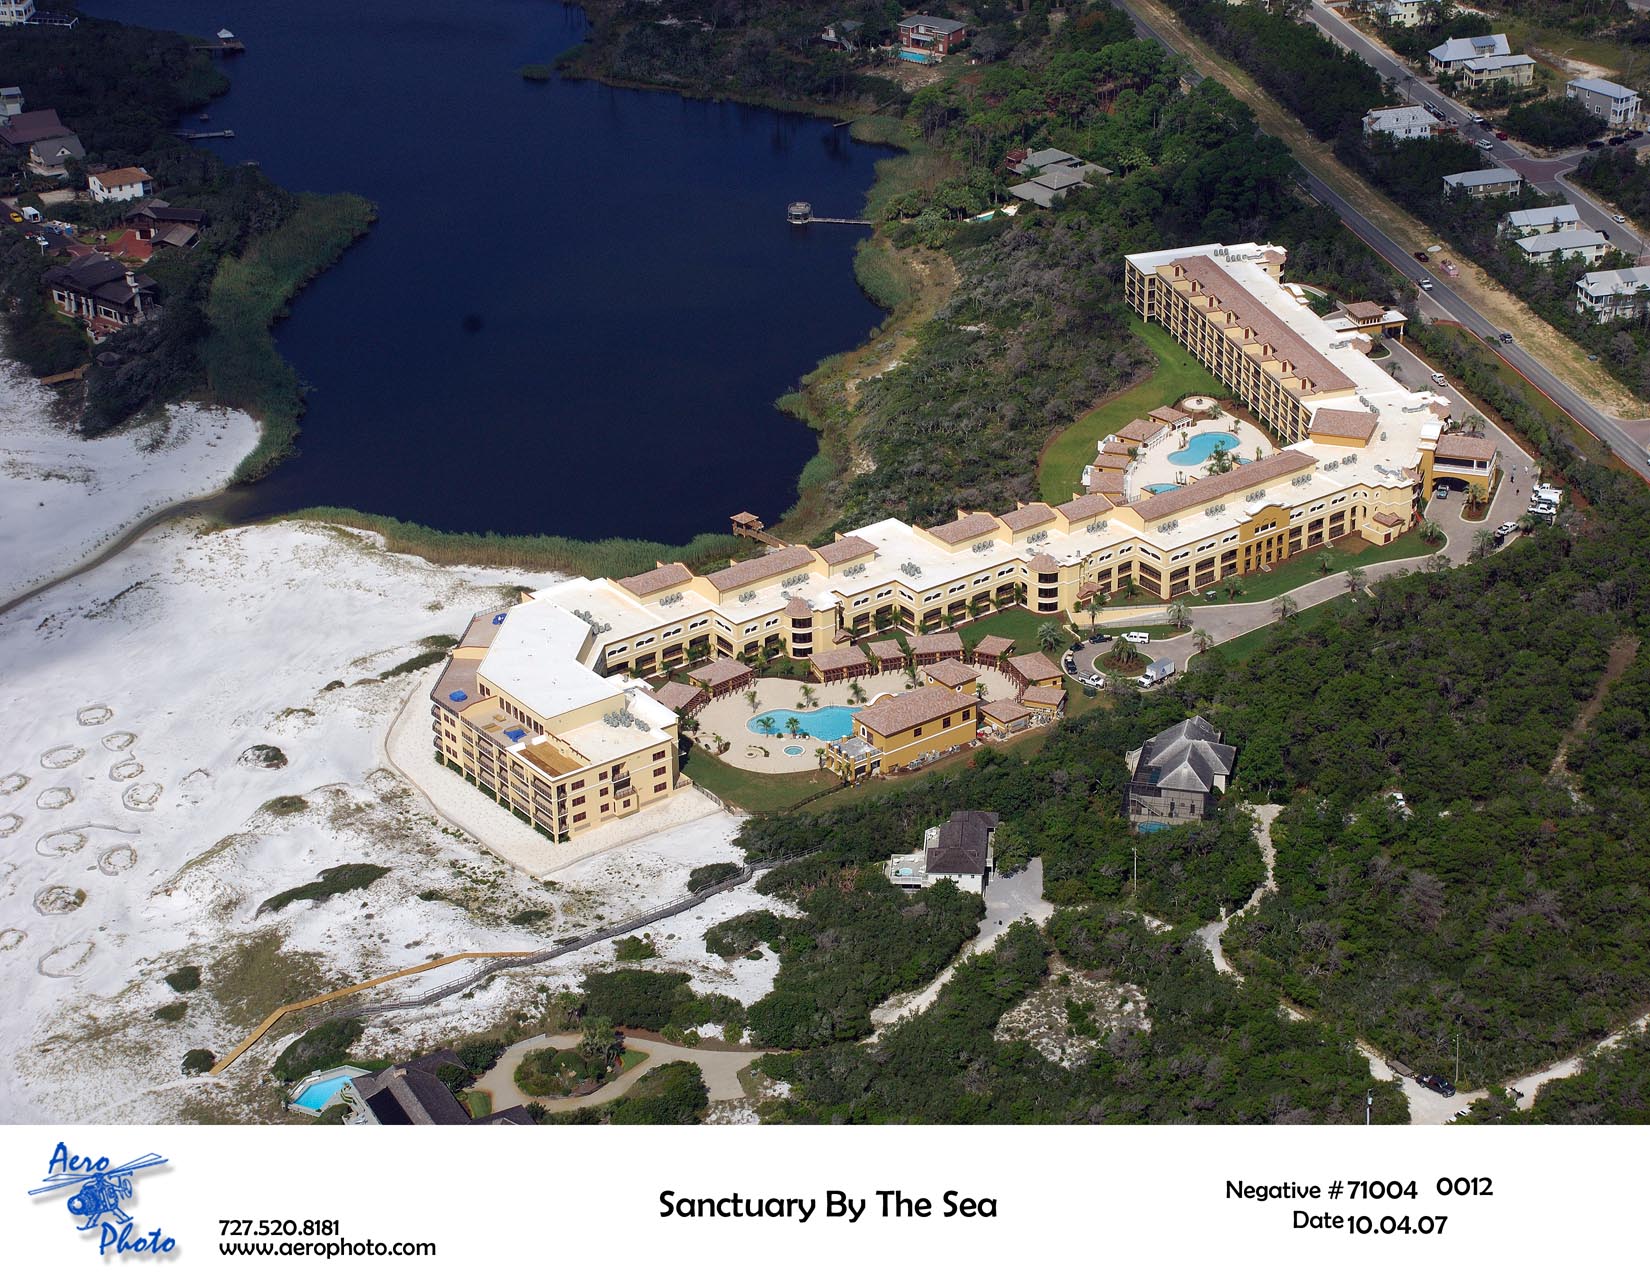 Sanctuary By The Sea, hotel and condo roofing contractors